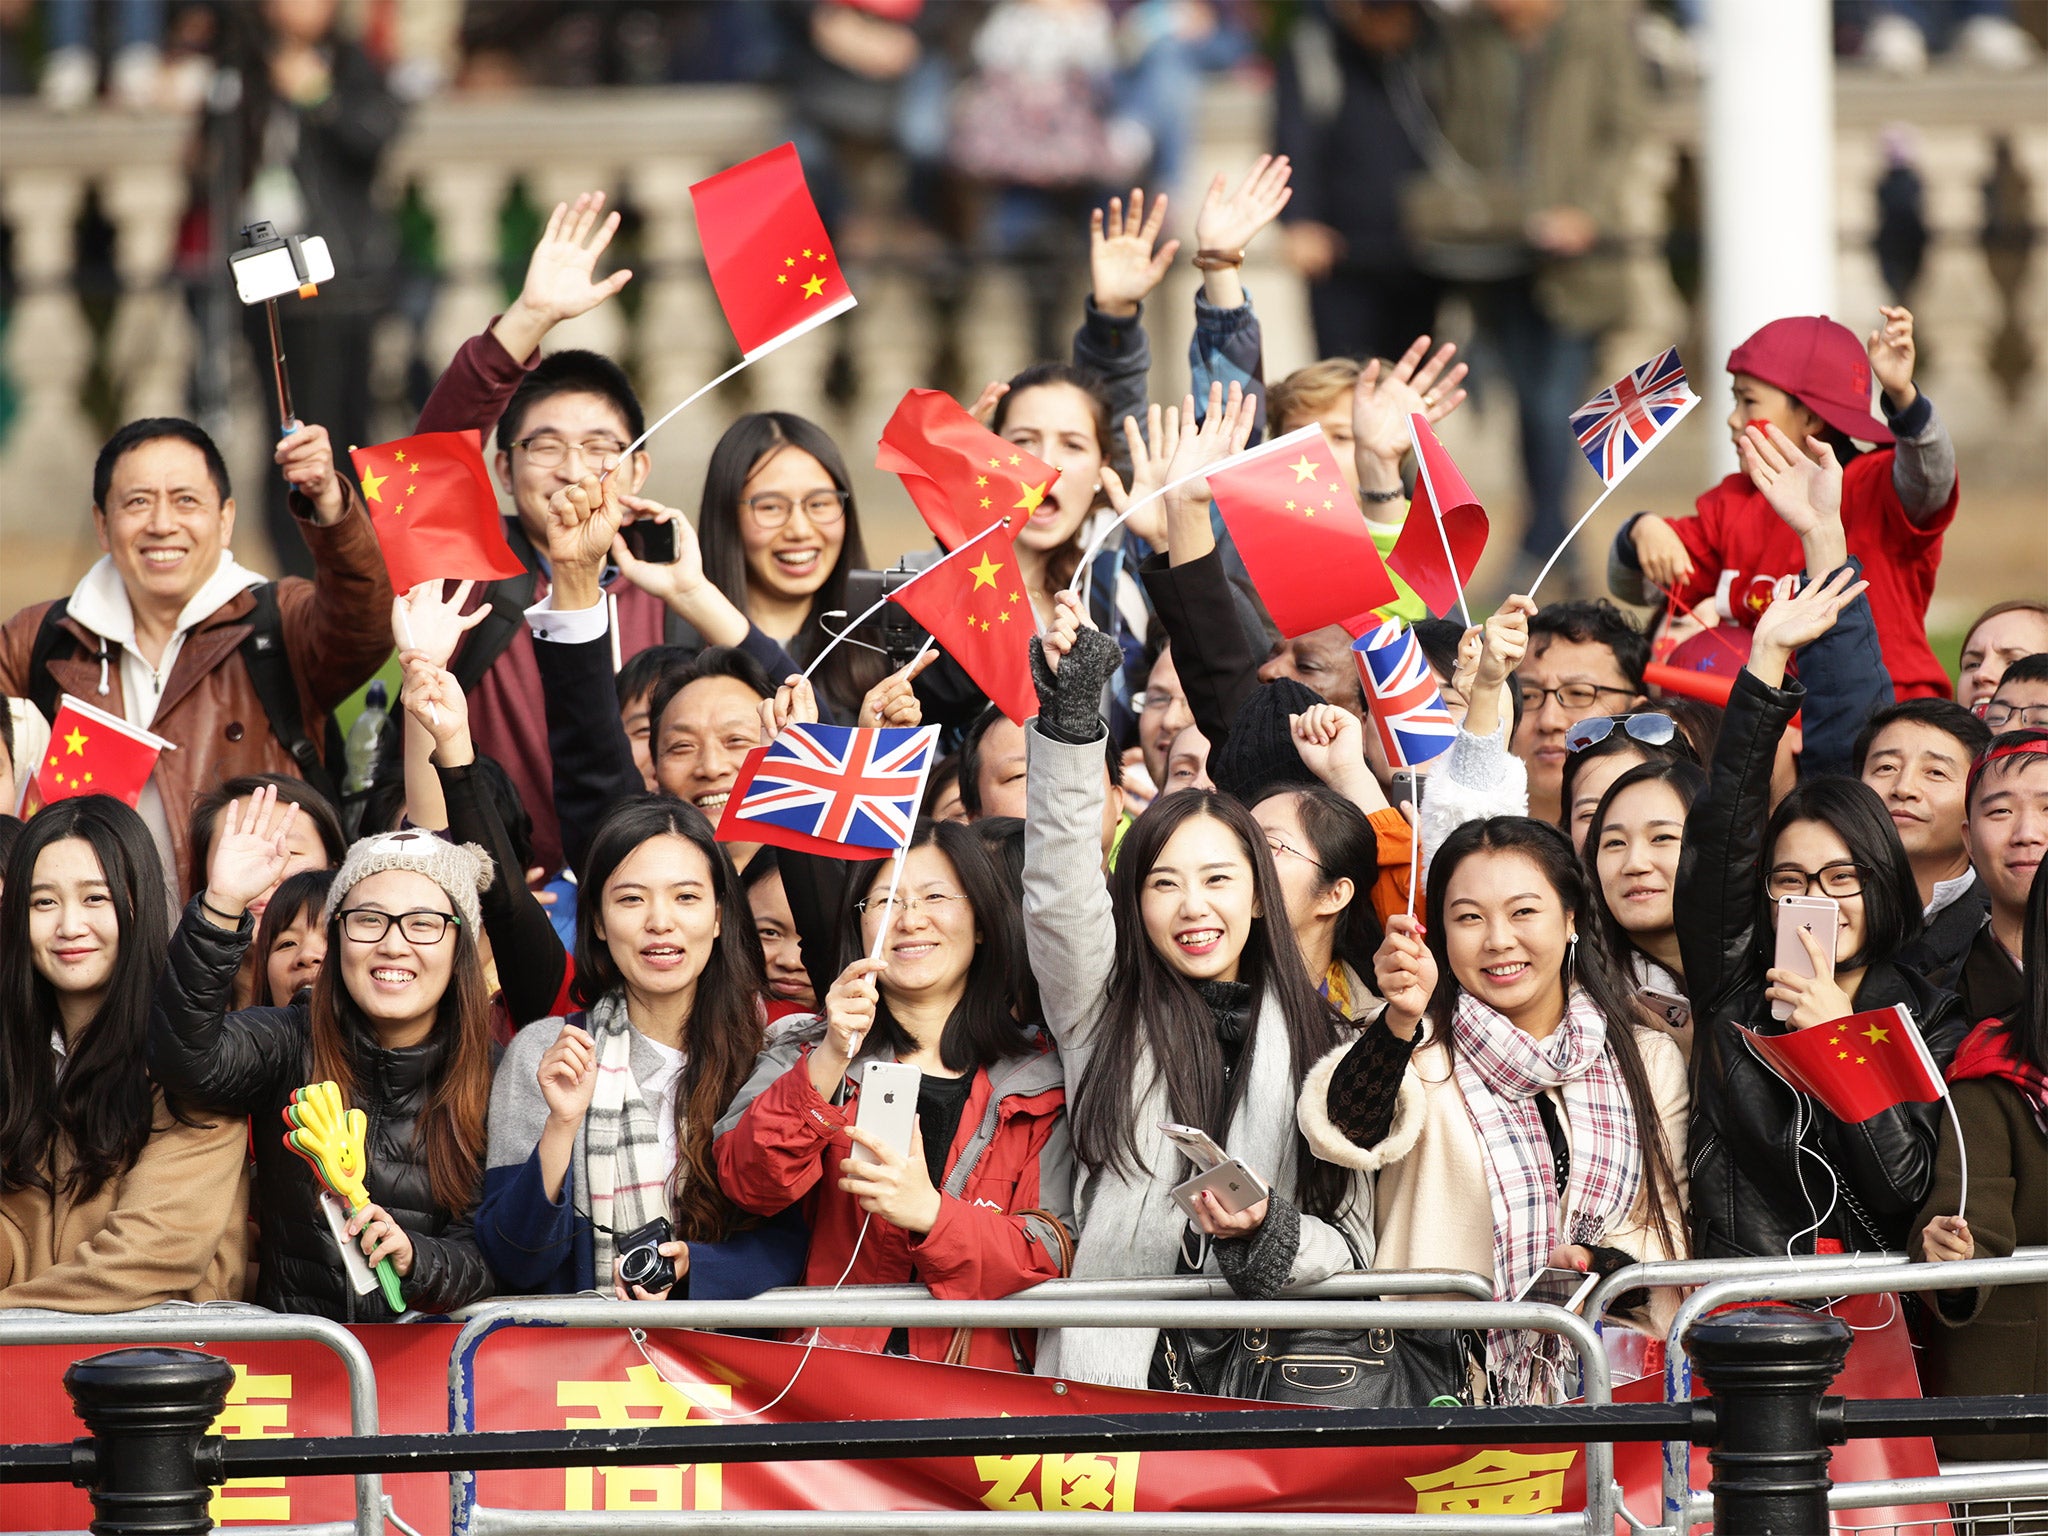 Spectators eagerly wait for the Queen and President Xi Jinping to pass along The Mall